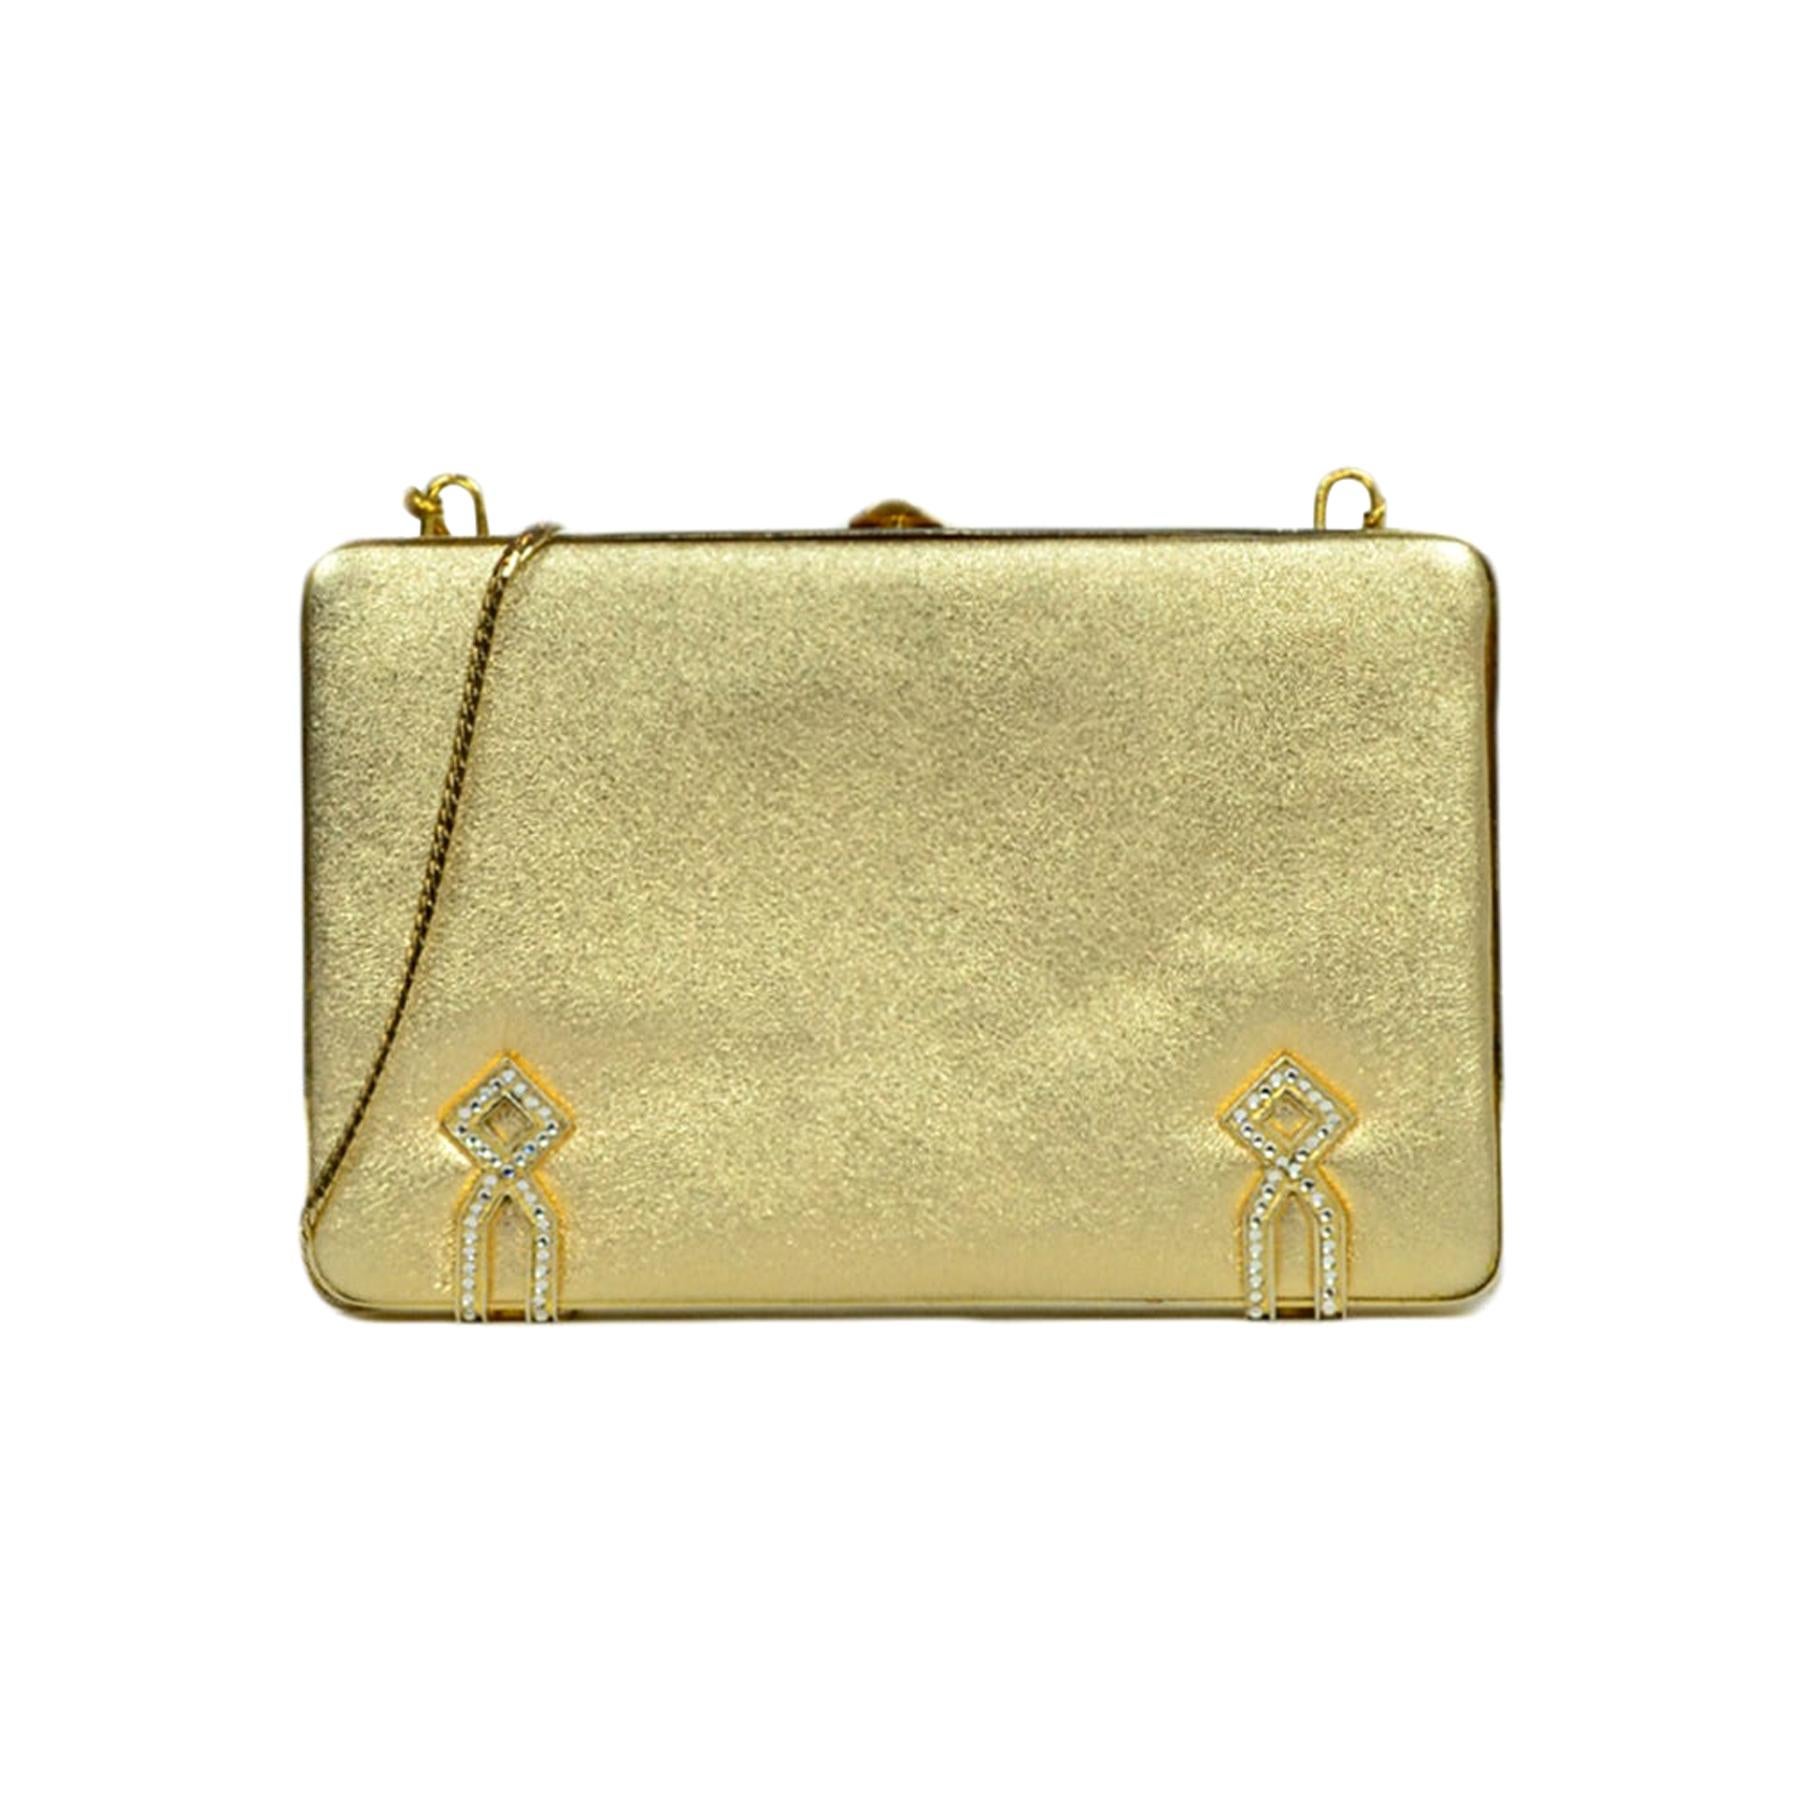 Judith Leiber Gold Leather Miniaudiere Bag with Chain Strap and Crystal Detail